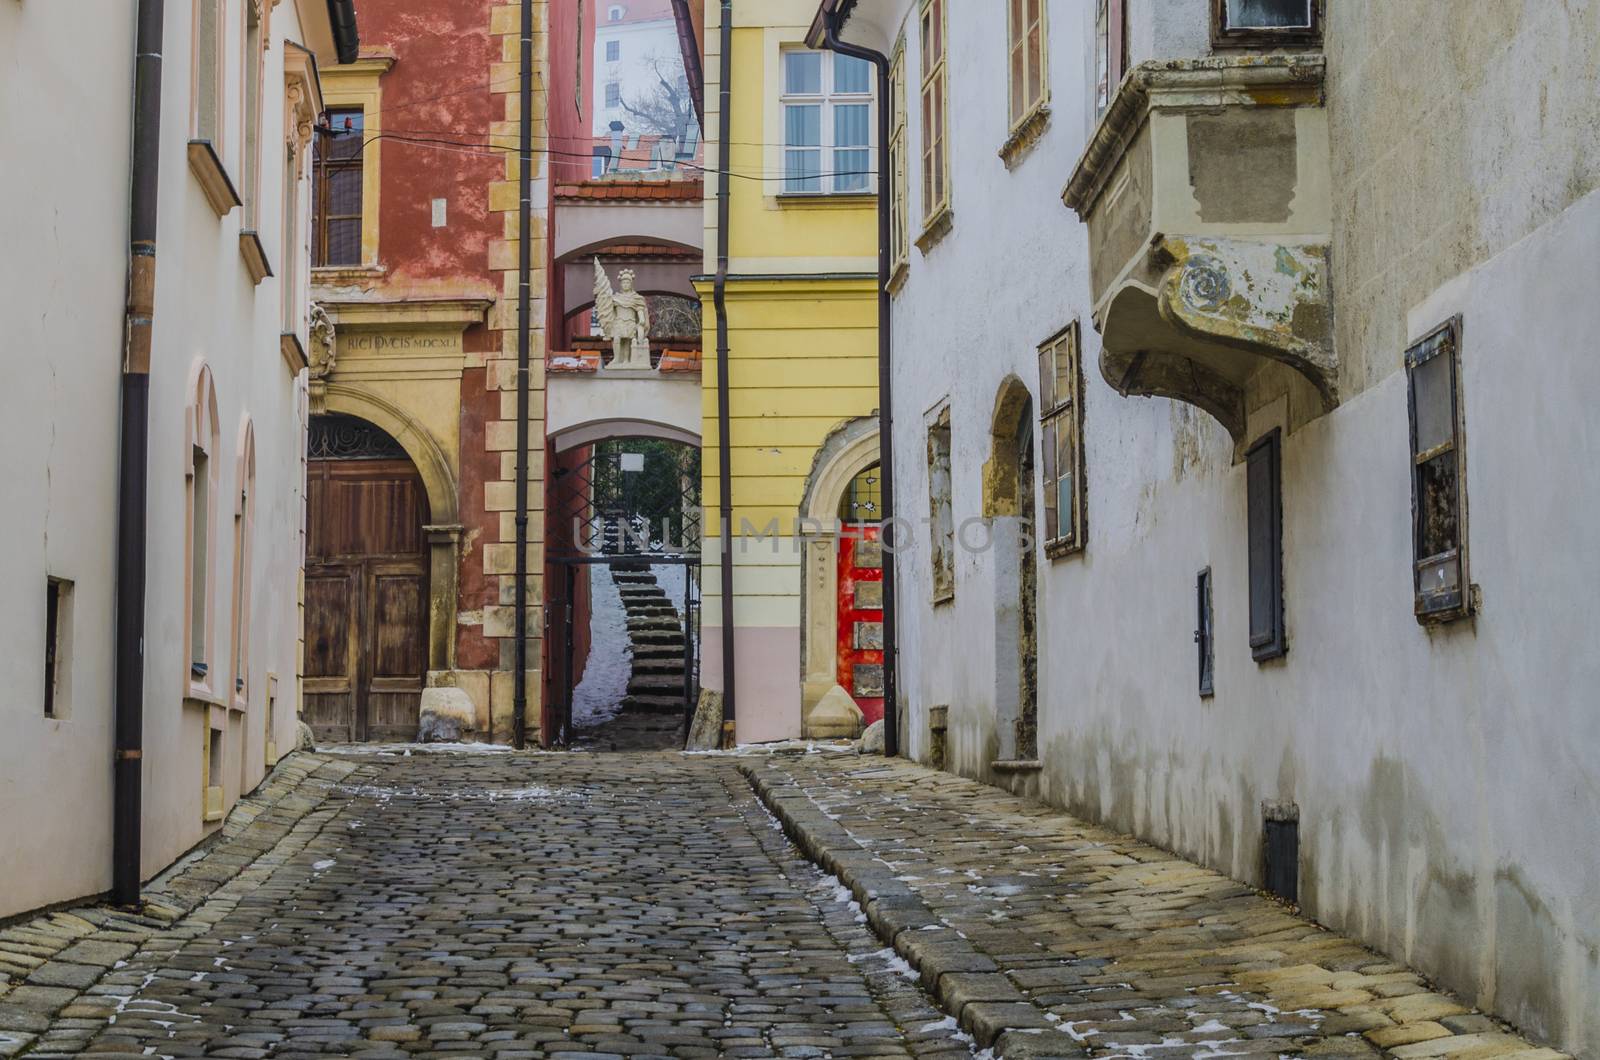 Streets and passageways mansions and old constructions traces of other epochs in the historical center of Bratislava Slovakia